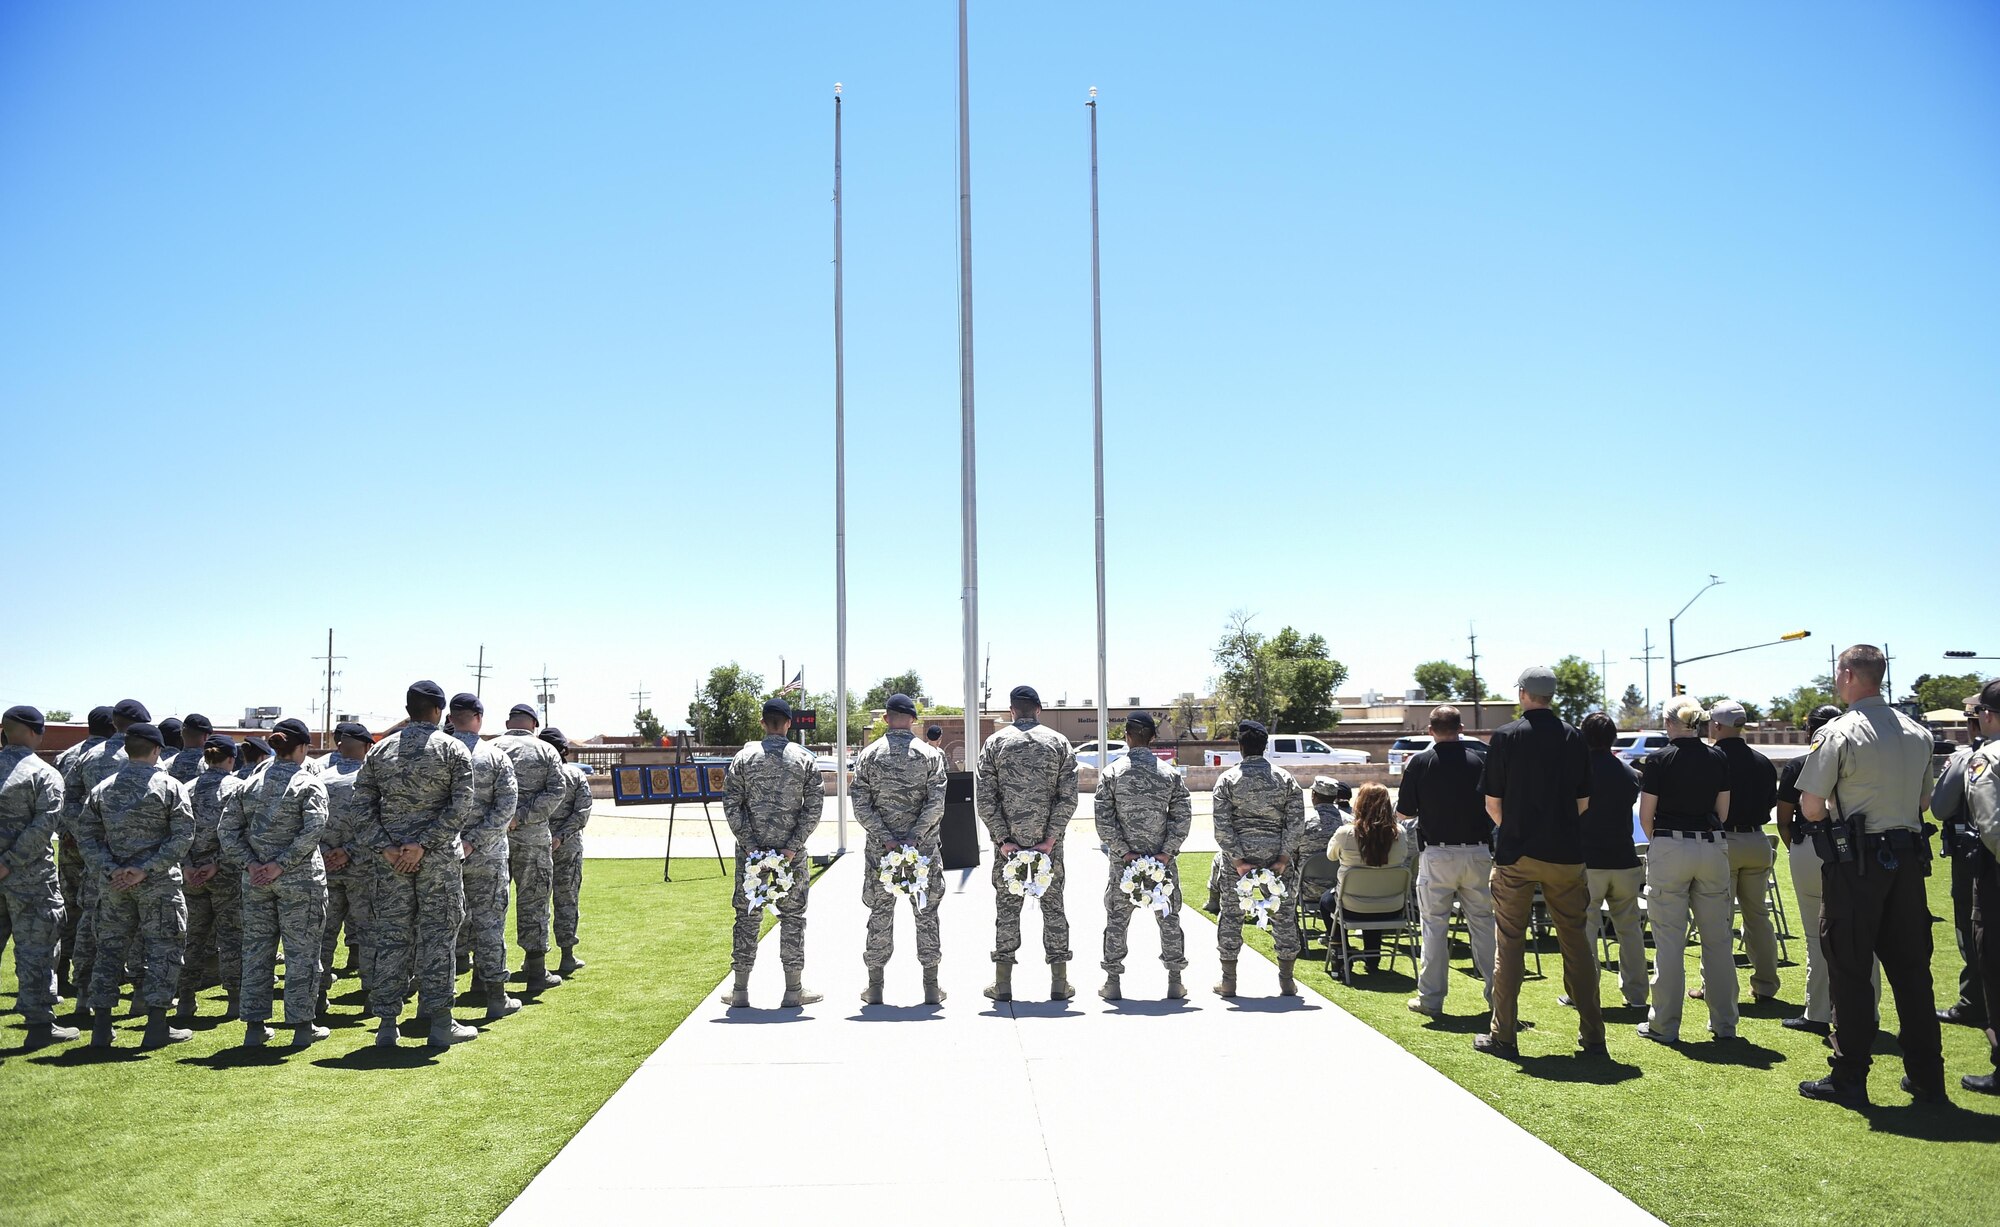 Members from local police departments and Airmen from Holloman Air Force Base Security Forces Squadron participate in a closing ceremony during National Police Week at Holloman Air Force Base, N.M. on May 15, 2017. National Police Week was established in 1962 by President John F. Kennedy to pay tribute to law enforcement officers who lost their lives in the line of duty for the safety and protection of others, according to the National Peace Officer's Memorial Fund website. Ceremonies are held annually in Washington D.C., as well as in communities across the nation. (U.S. Air Force photo by Staff Sgt. Stacy Jonsgaard)    